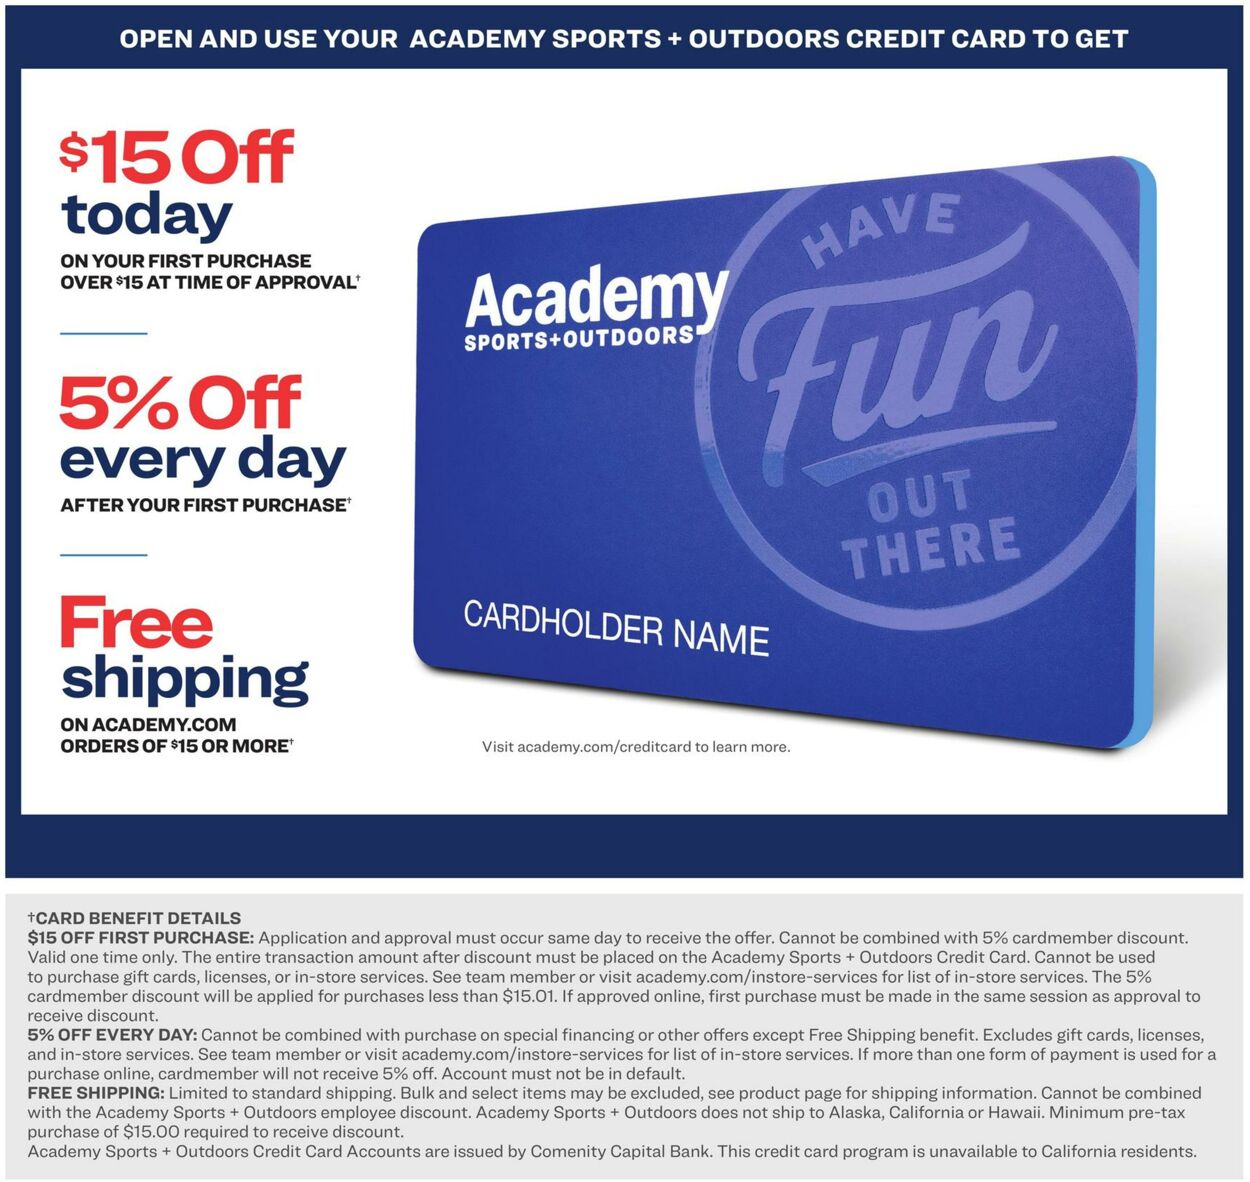 Weekly ad Academy Sports 05/11/2023 - 05/14/2023